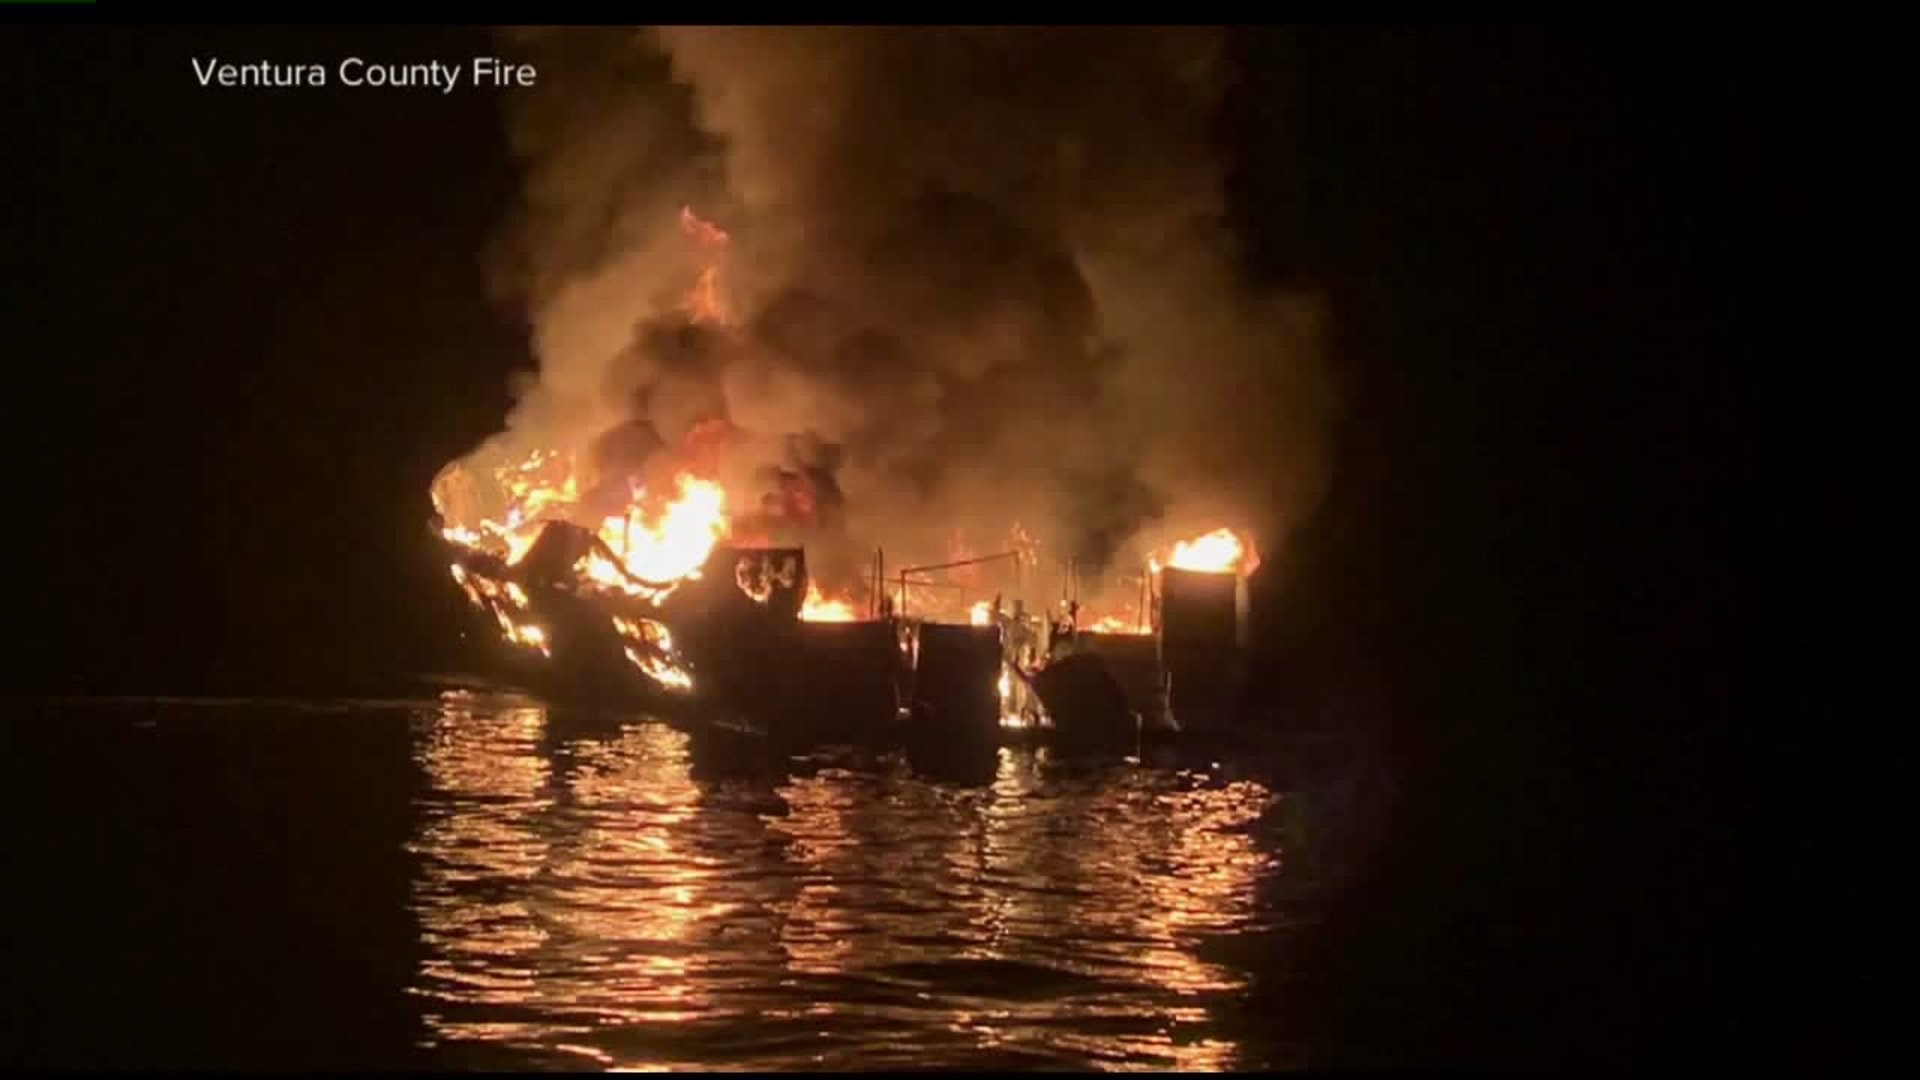 At least 25 confirmed dead in California boat fire